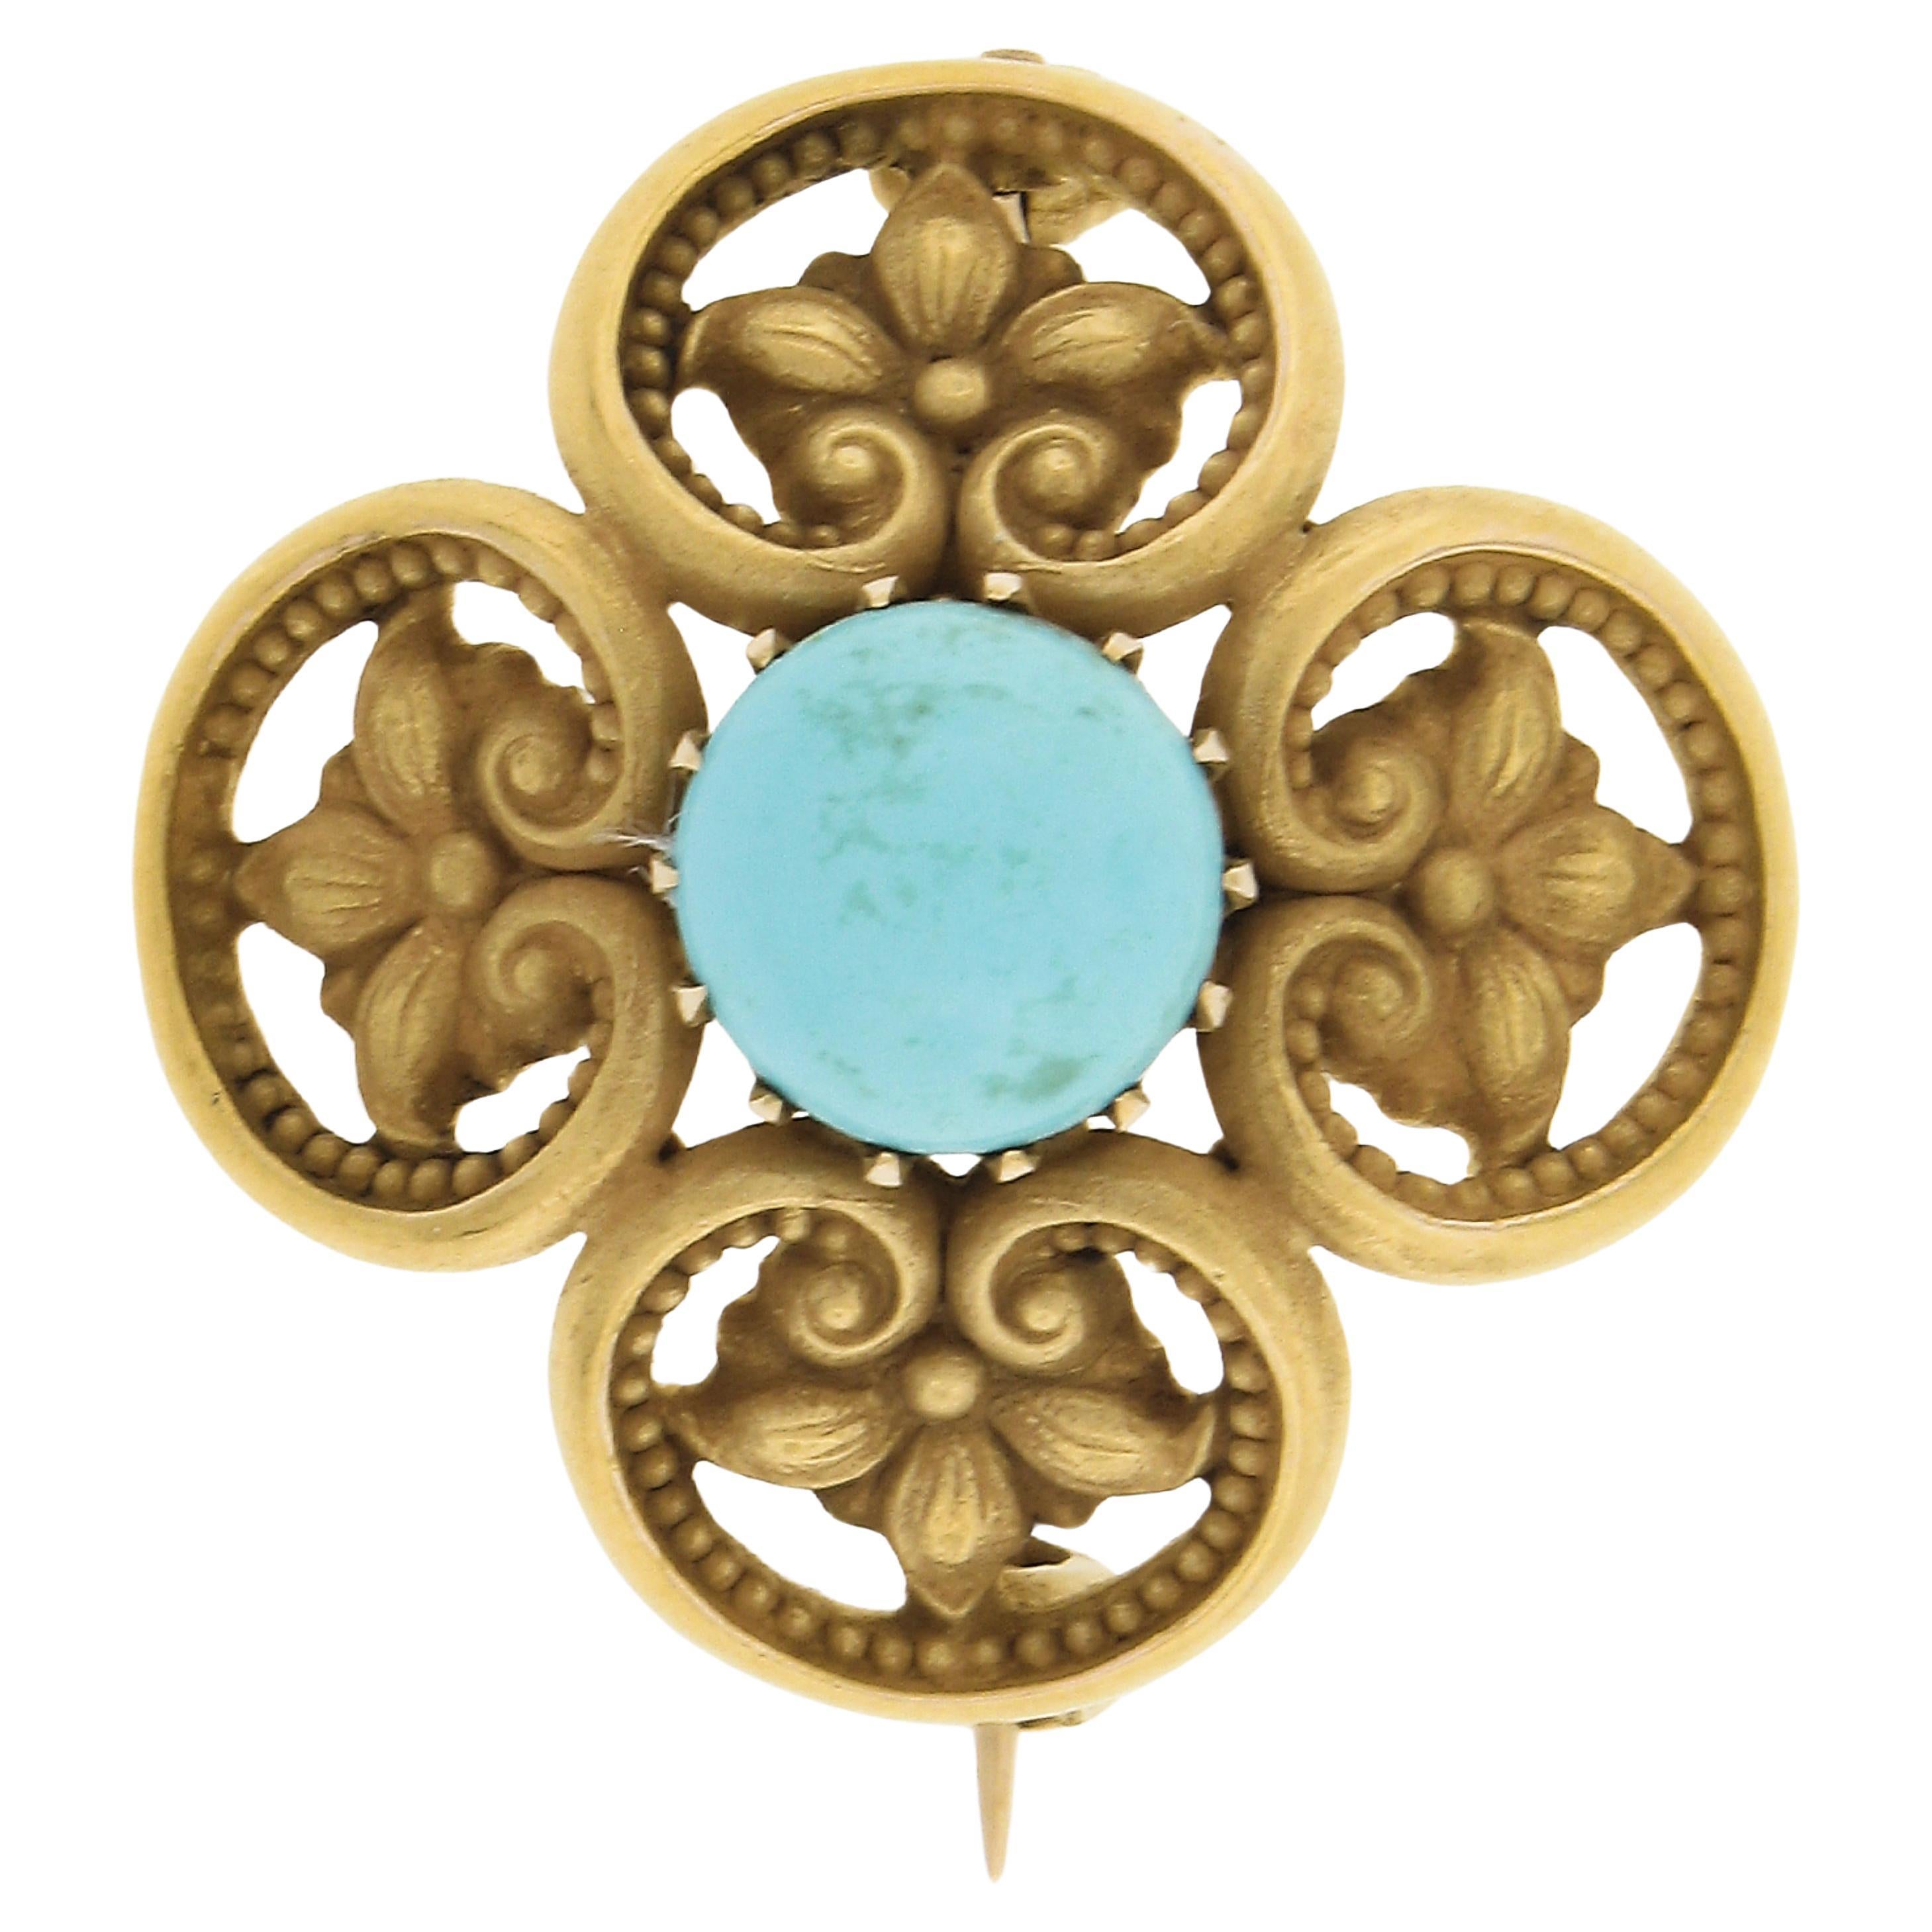 Antique Art Nouveau 14k Yellow Gold 8mm Turquoise Detailed Flower Pin Brooch